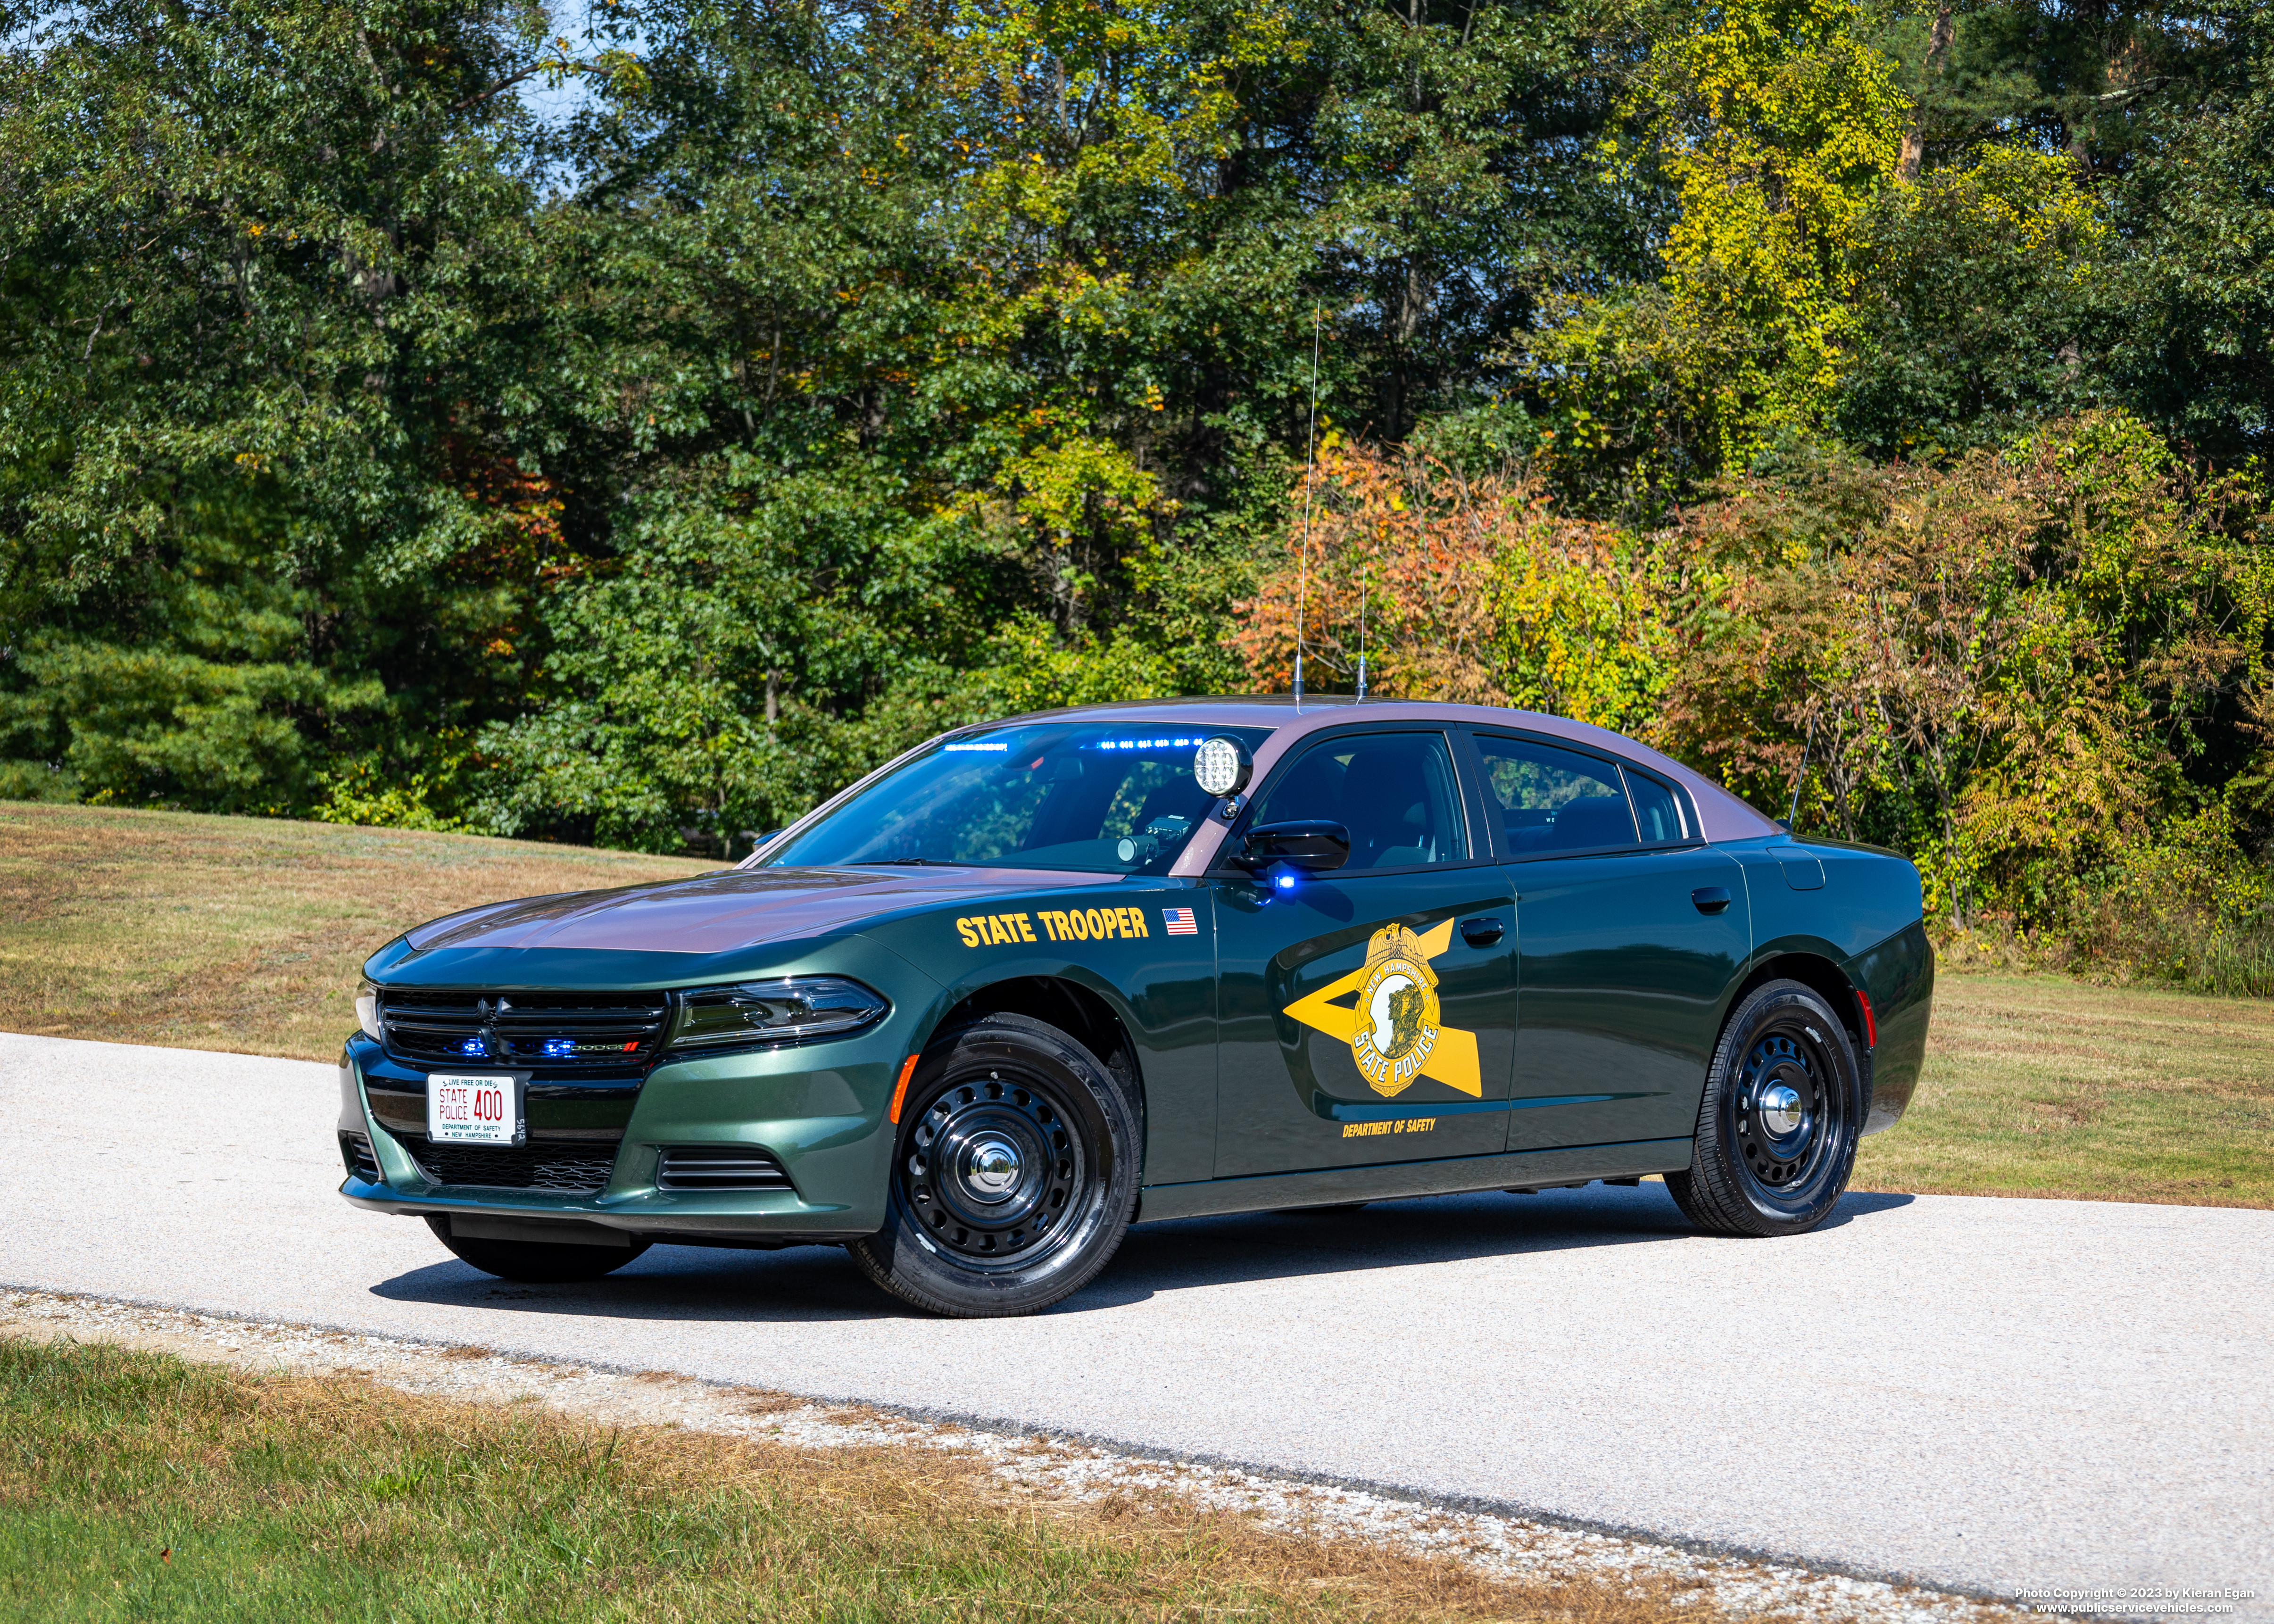 A photo  of New Hampshire State Police
            Cruiser 400, a 2022 Dodge Charger             taken by Kieran Egan